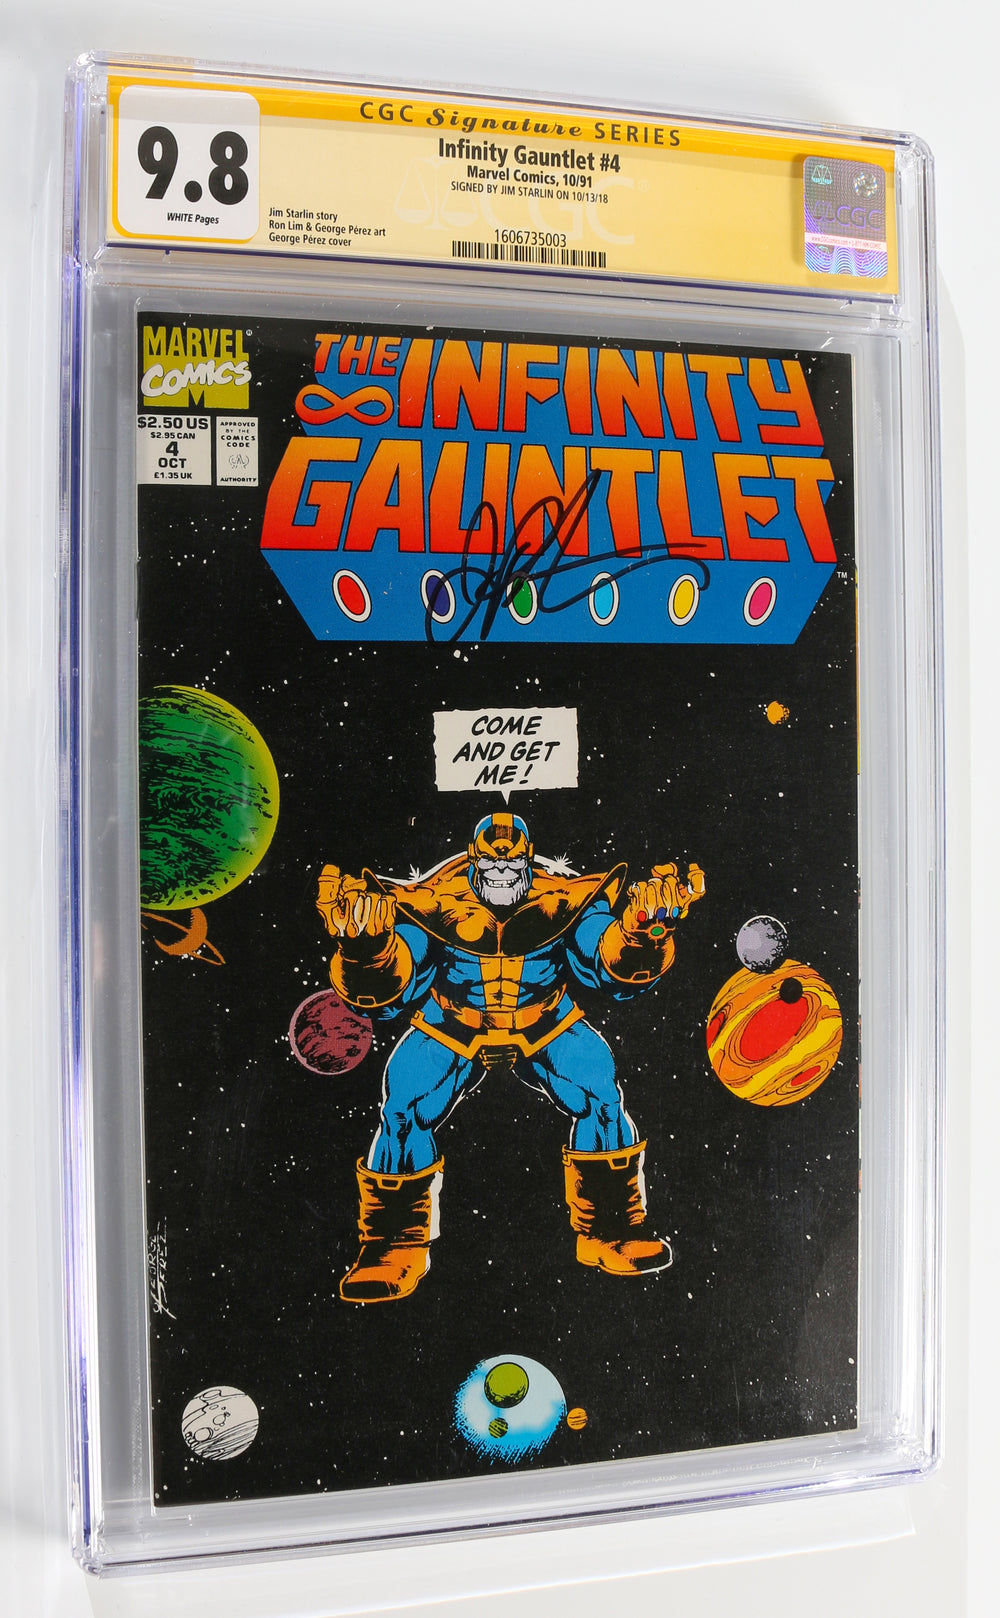 Infinity Gauntlet #4 - Signed by Thanos Creator Jim Starlin (CGC Signature Series 9.8) 1991